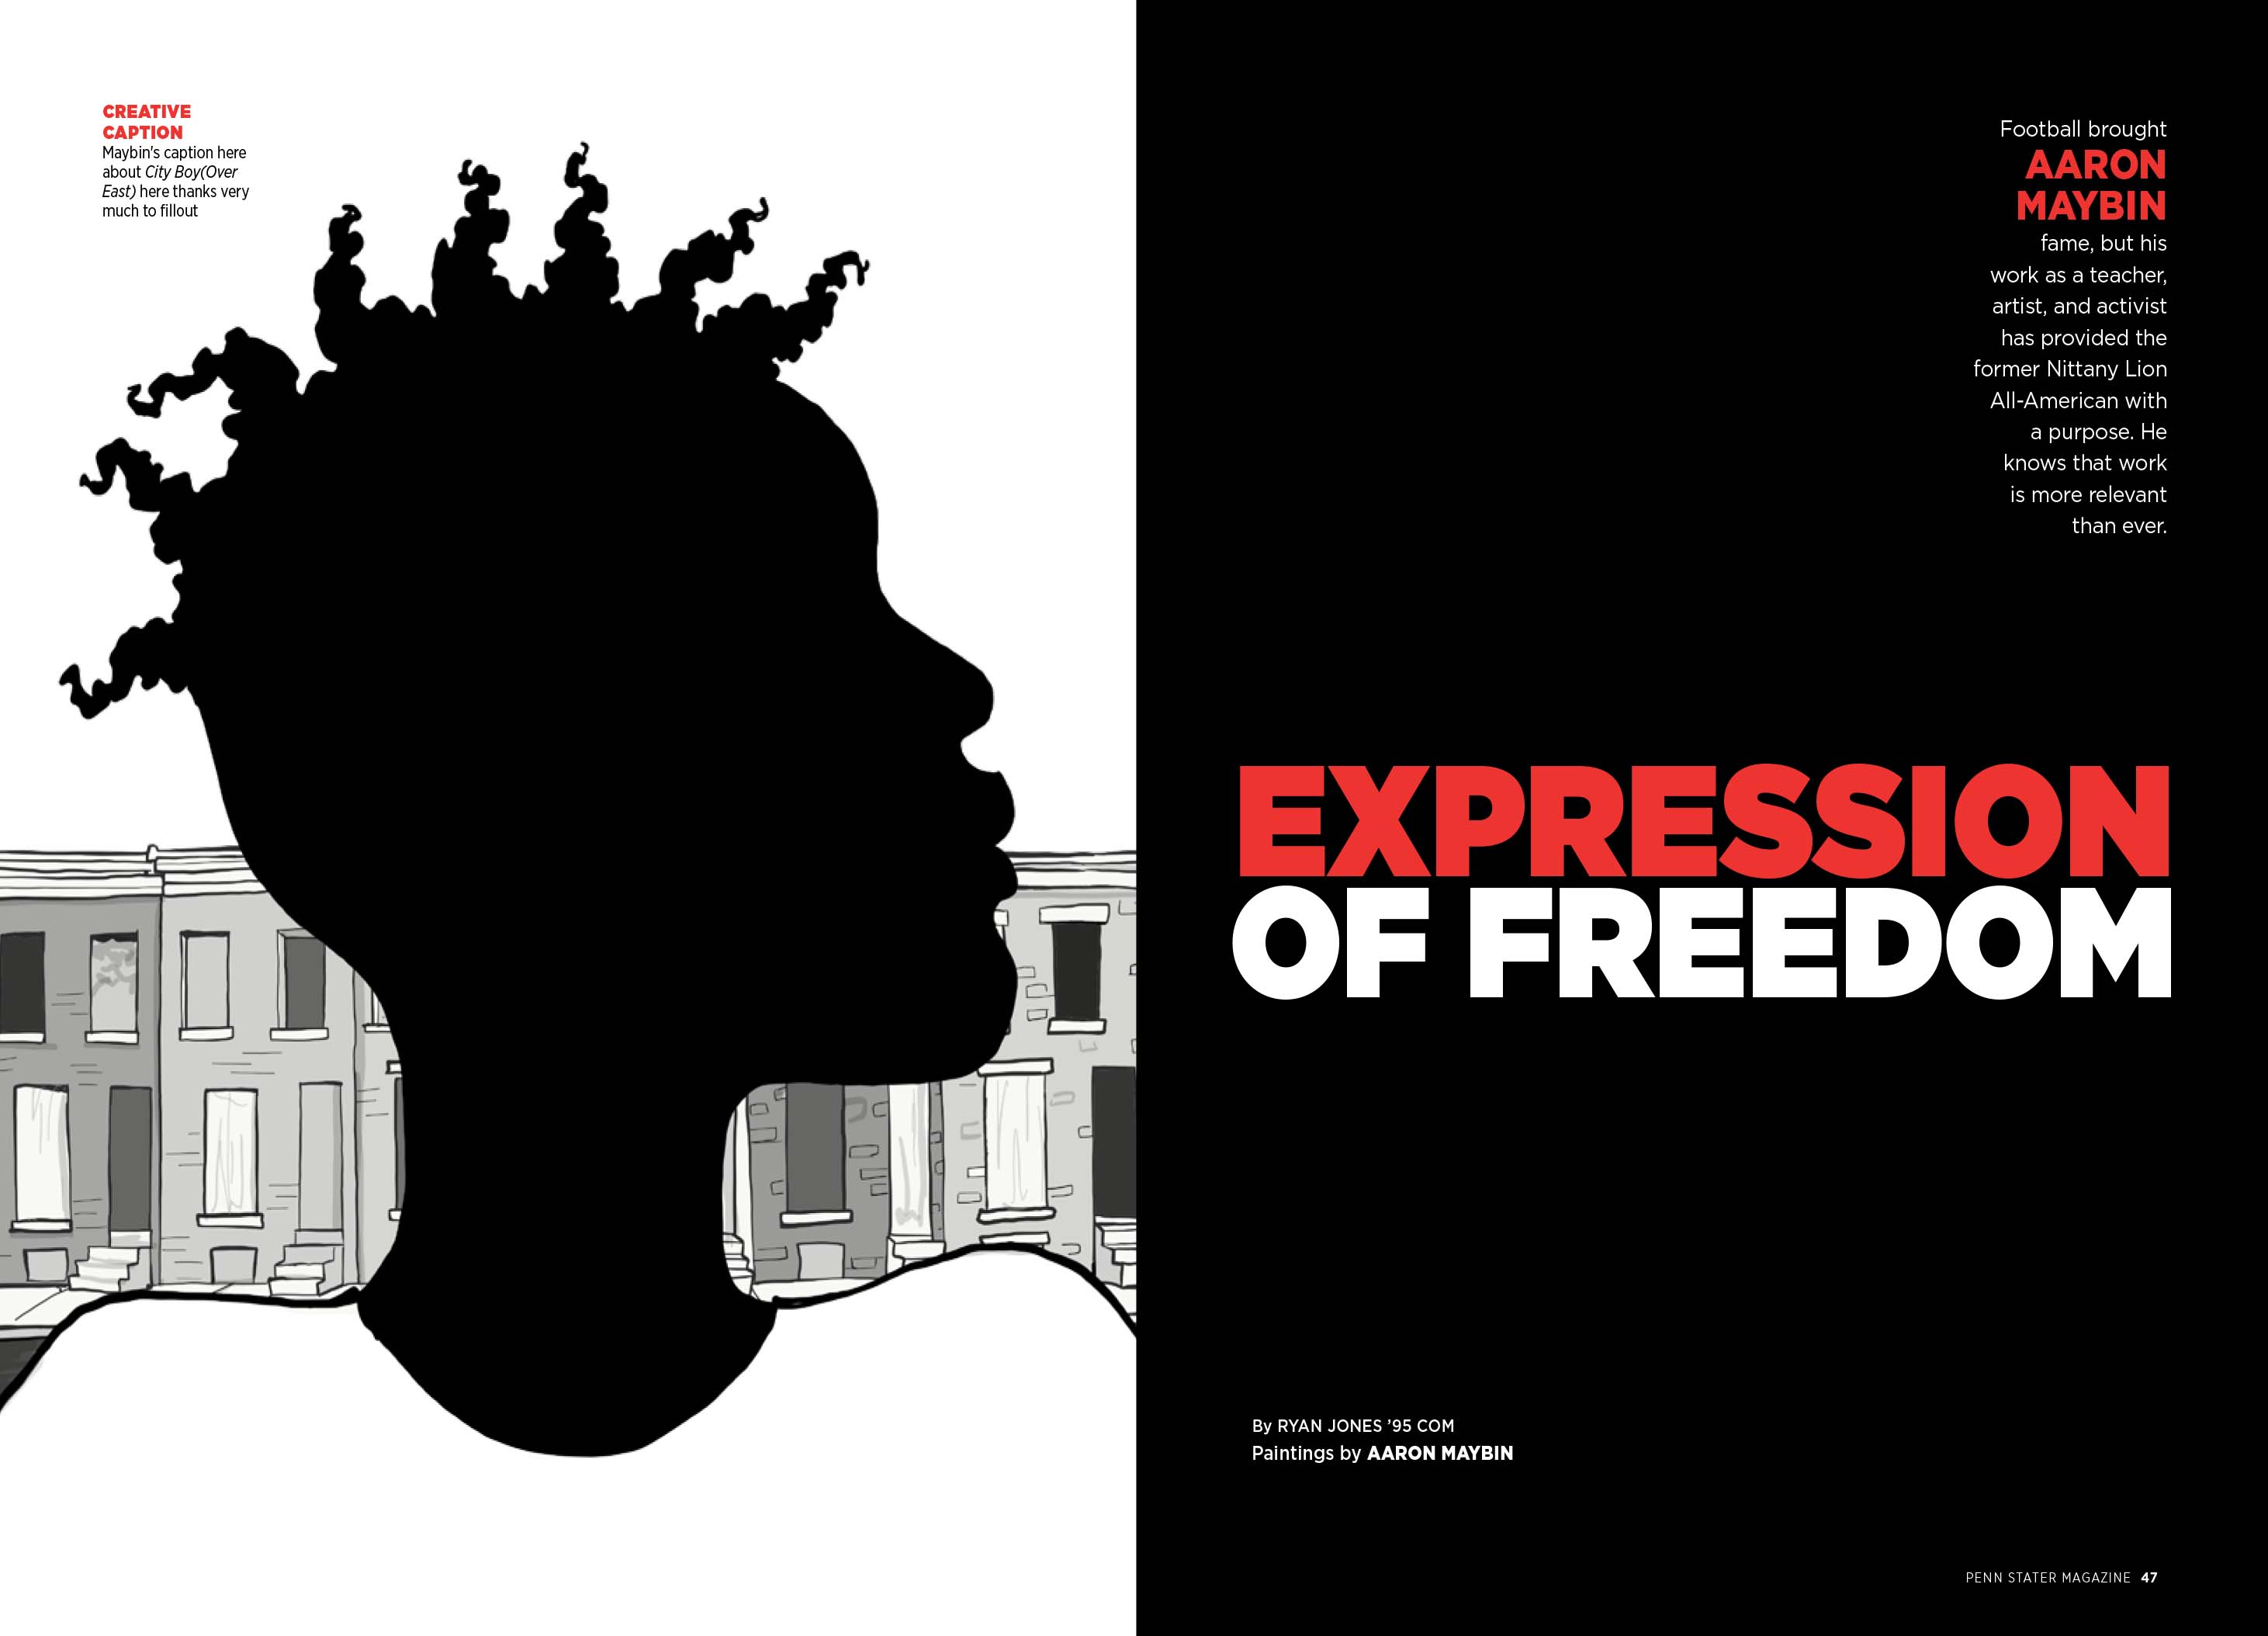 Expression of Freedom article spread